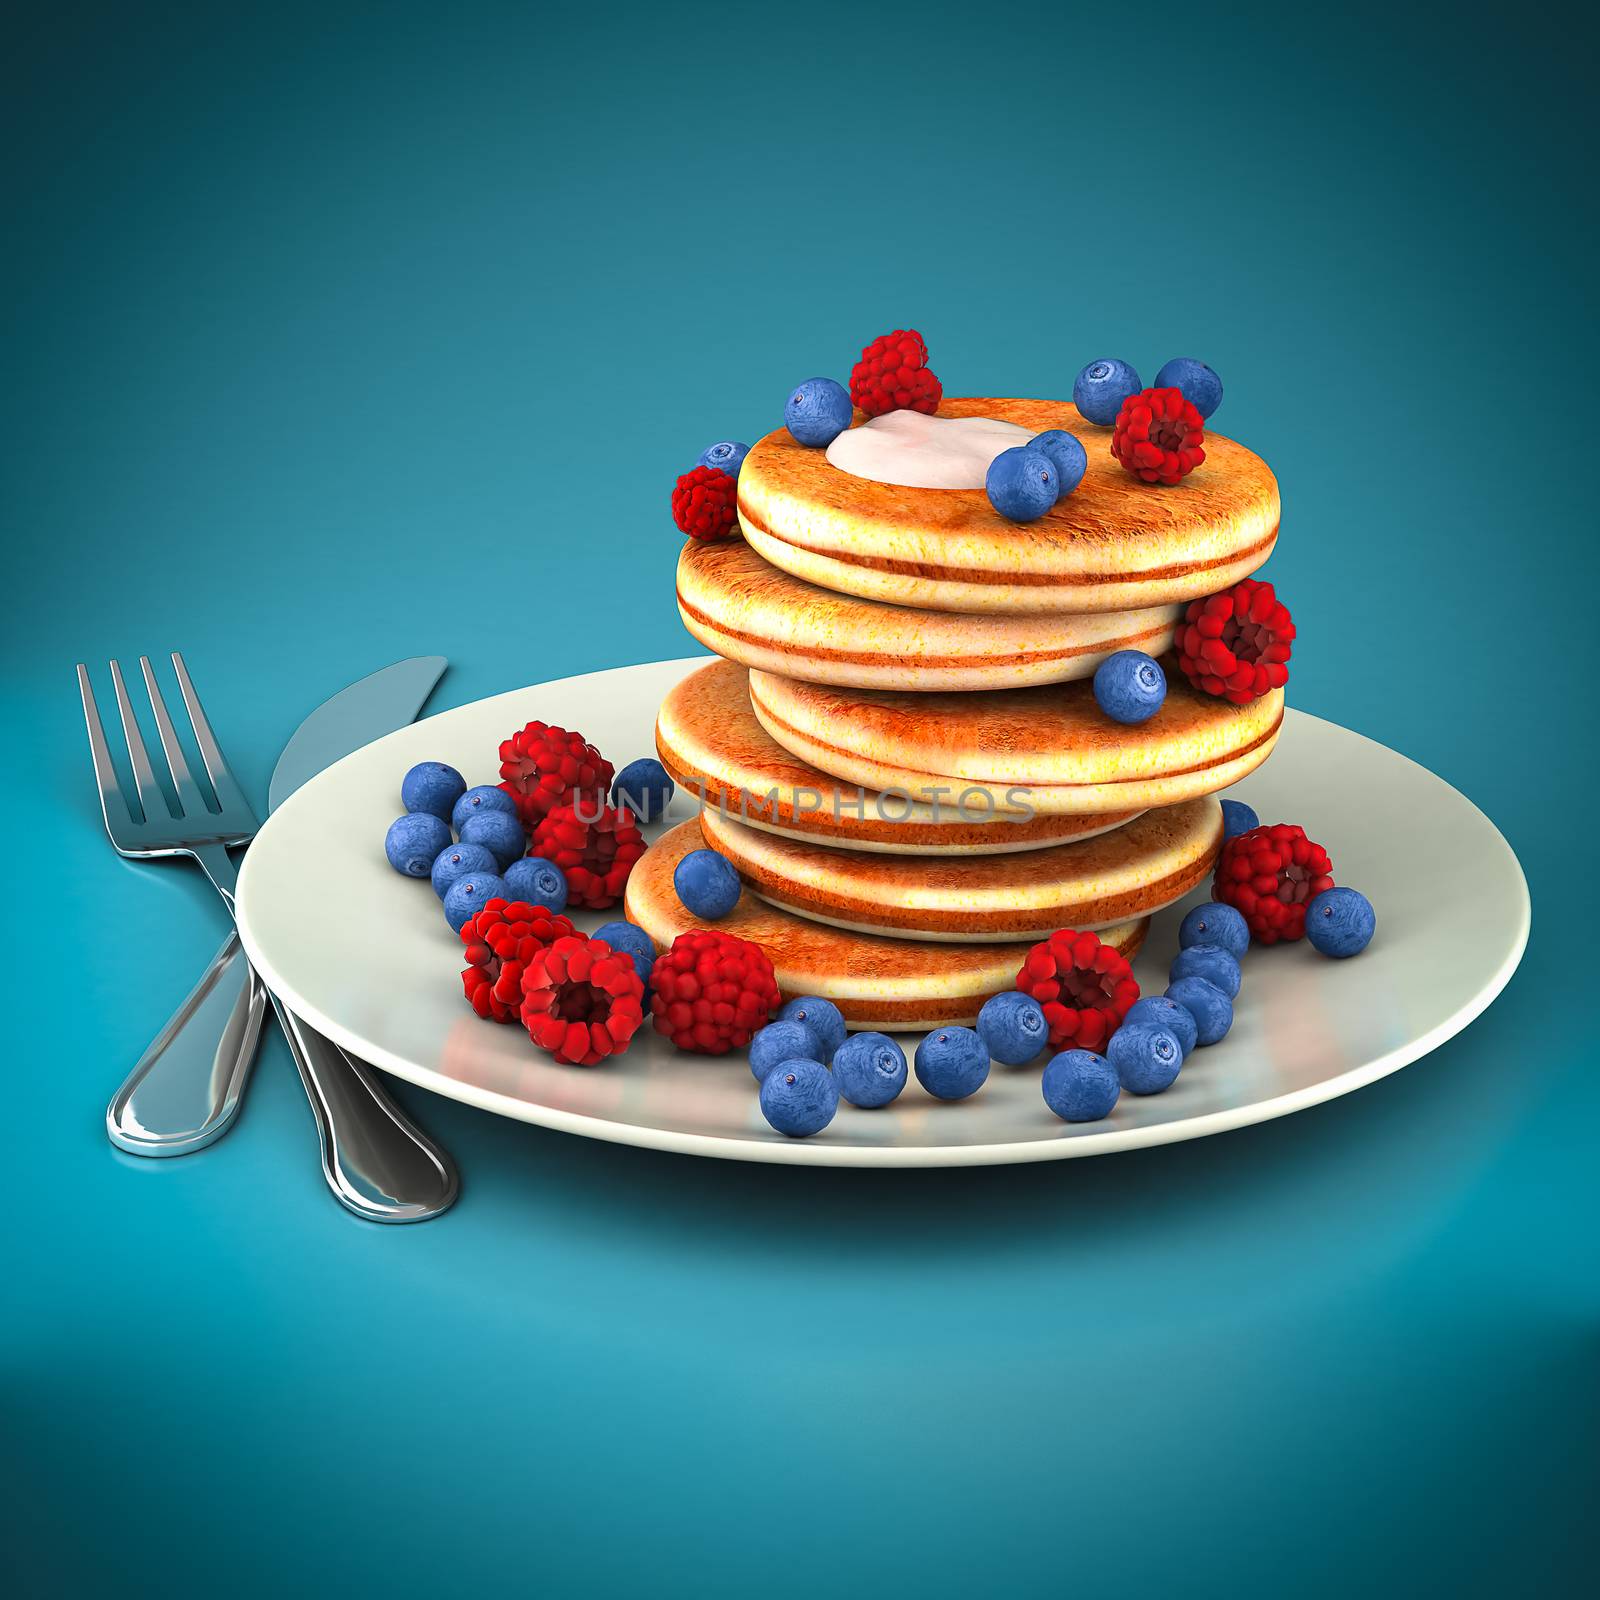 Pancakes with berries on a blue background